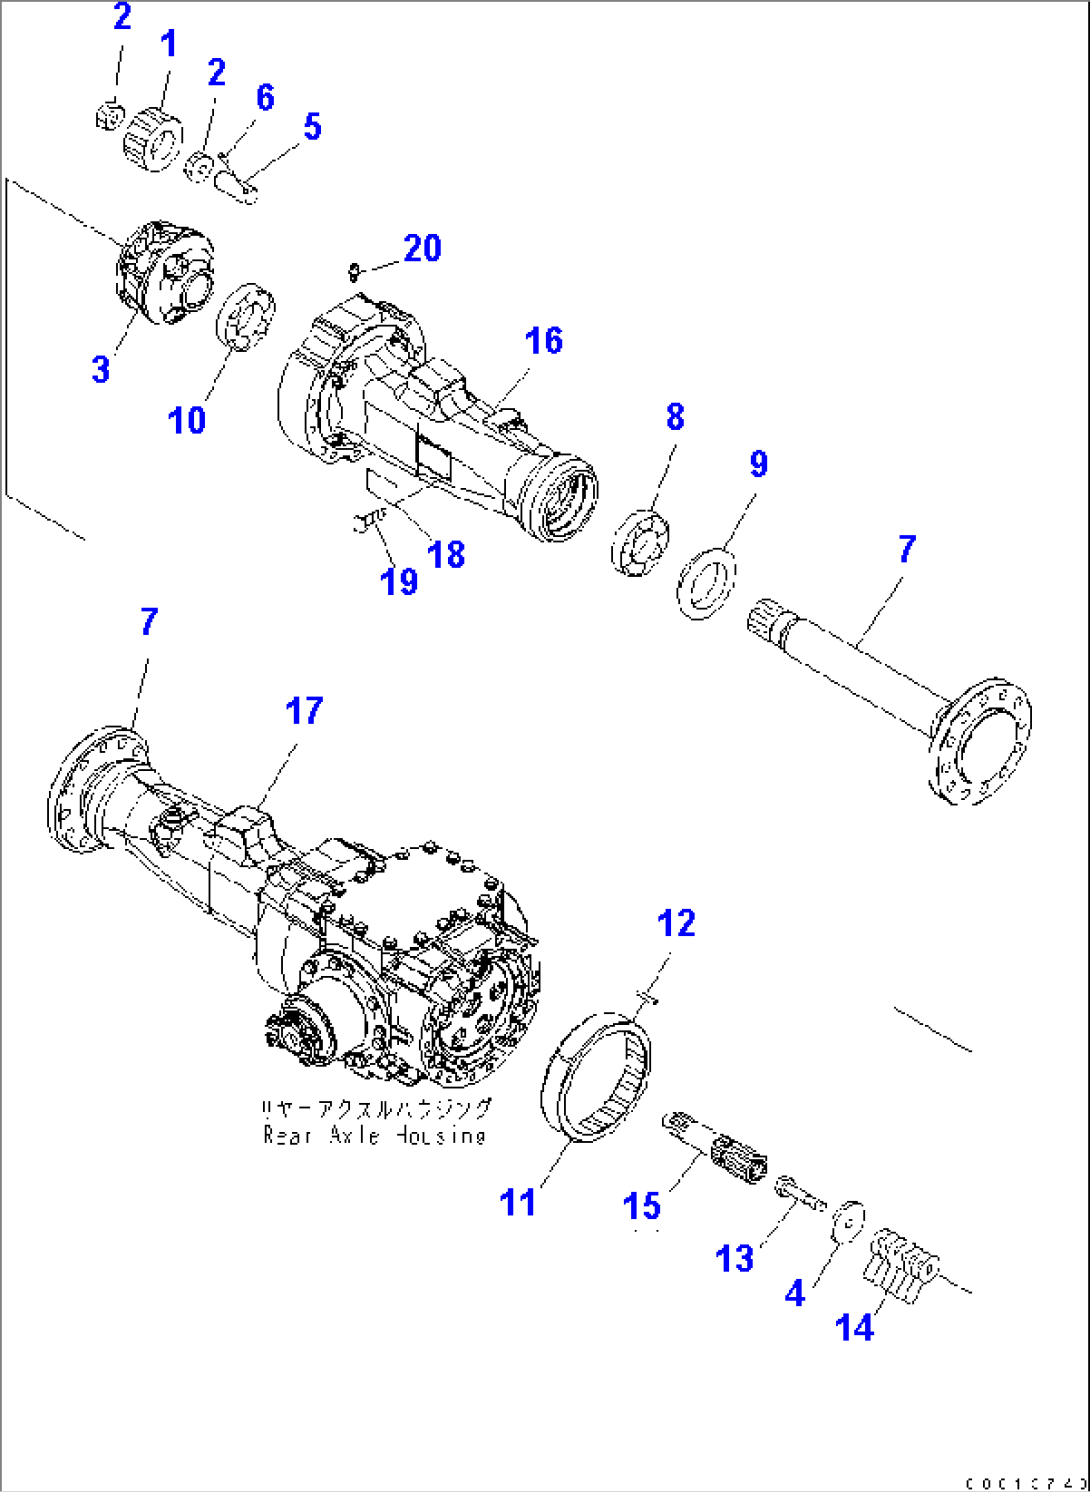 REAR AXLE (FINAL DRIVE AND HOUSING)